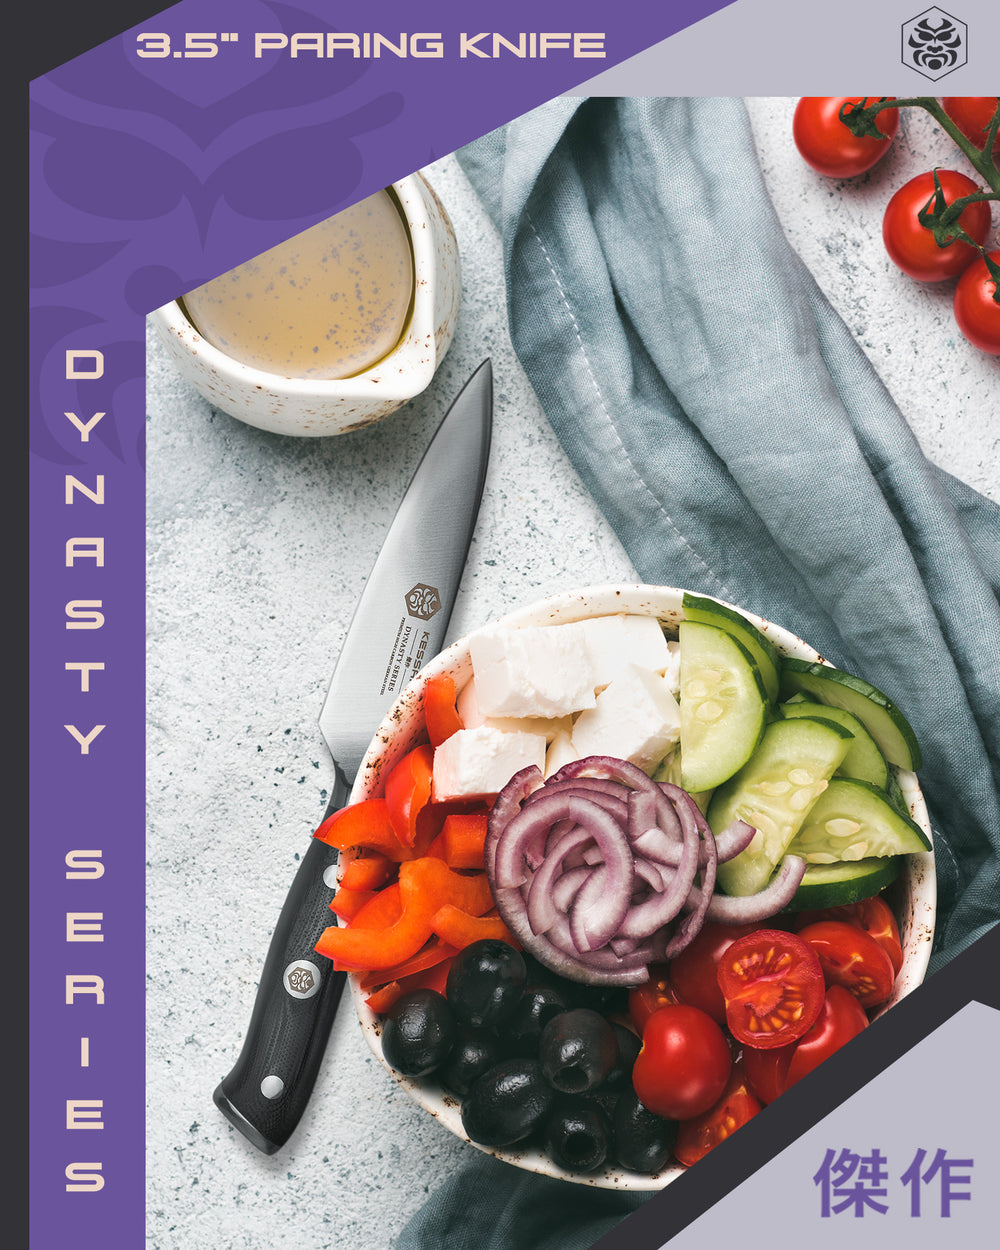 The Dynasty Paring Knife with a bowl of sliced cucmuber, red onions, red peppers, black olives, and chunks of cheese